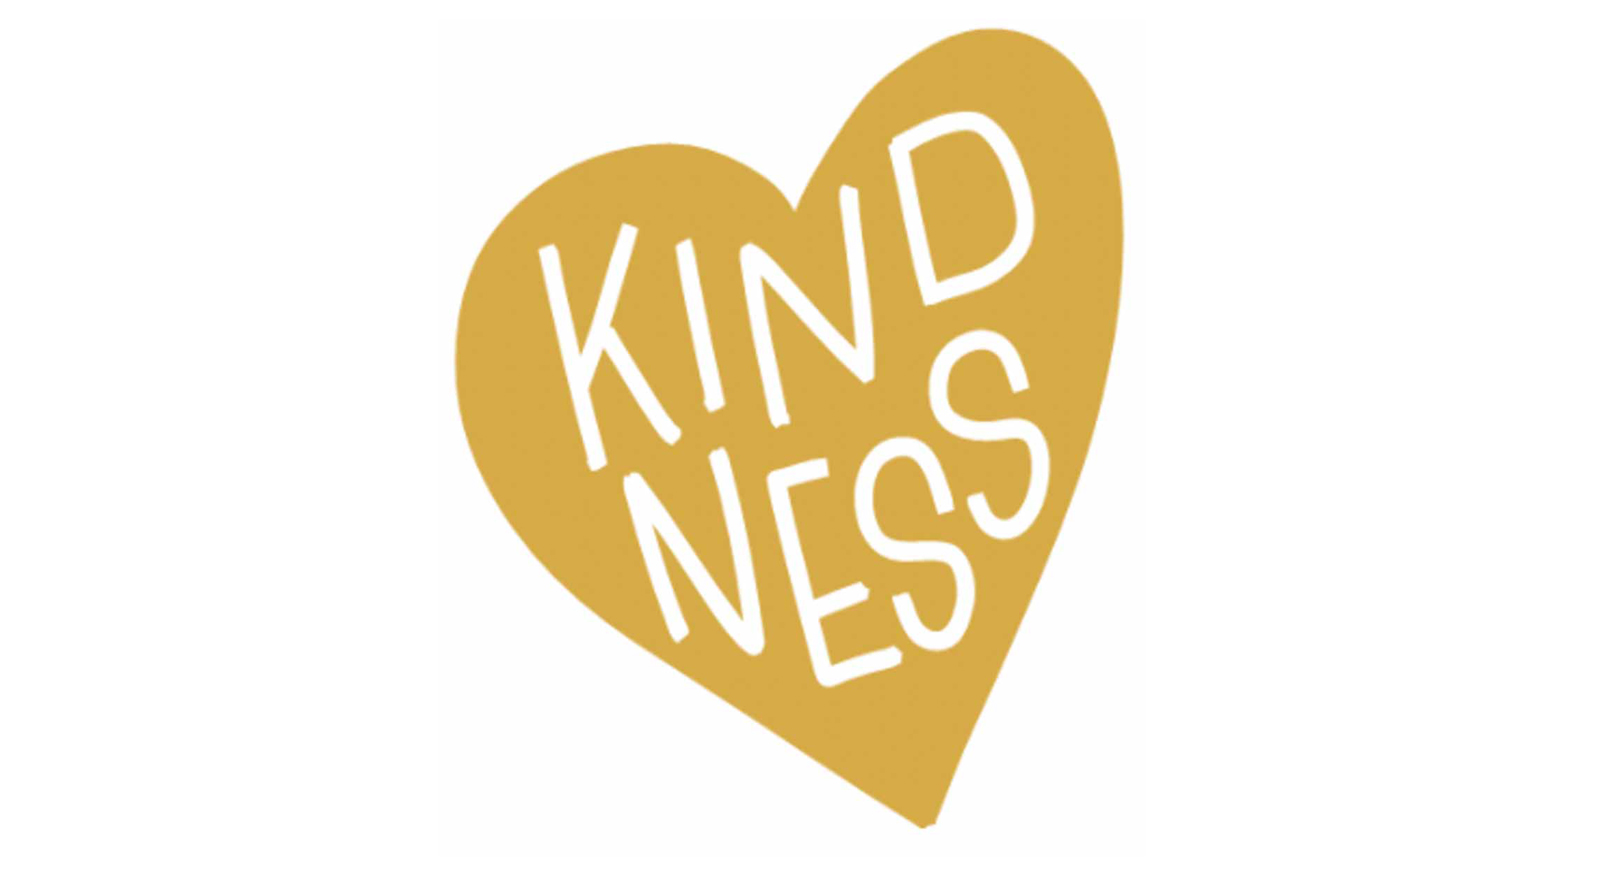 Cricut Access kindness images: being kind is cool